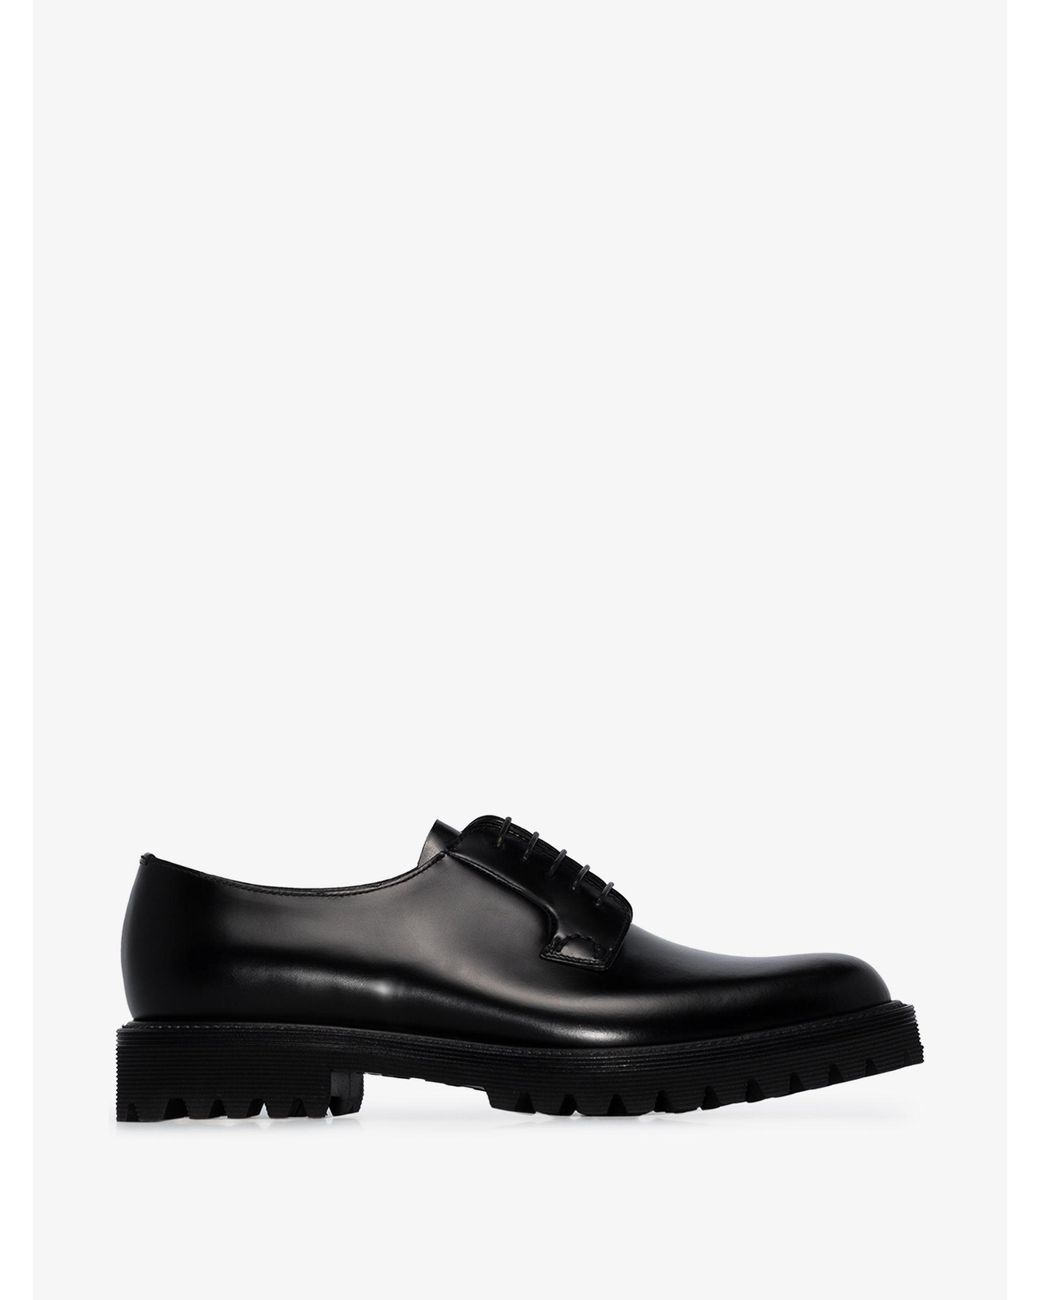 Church's Shannon Leather Derby Shoes in Black - Lyst